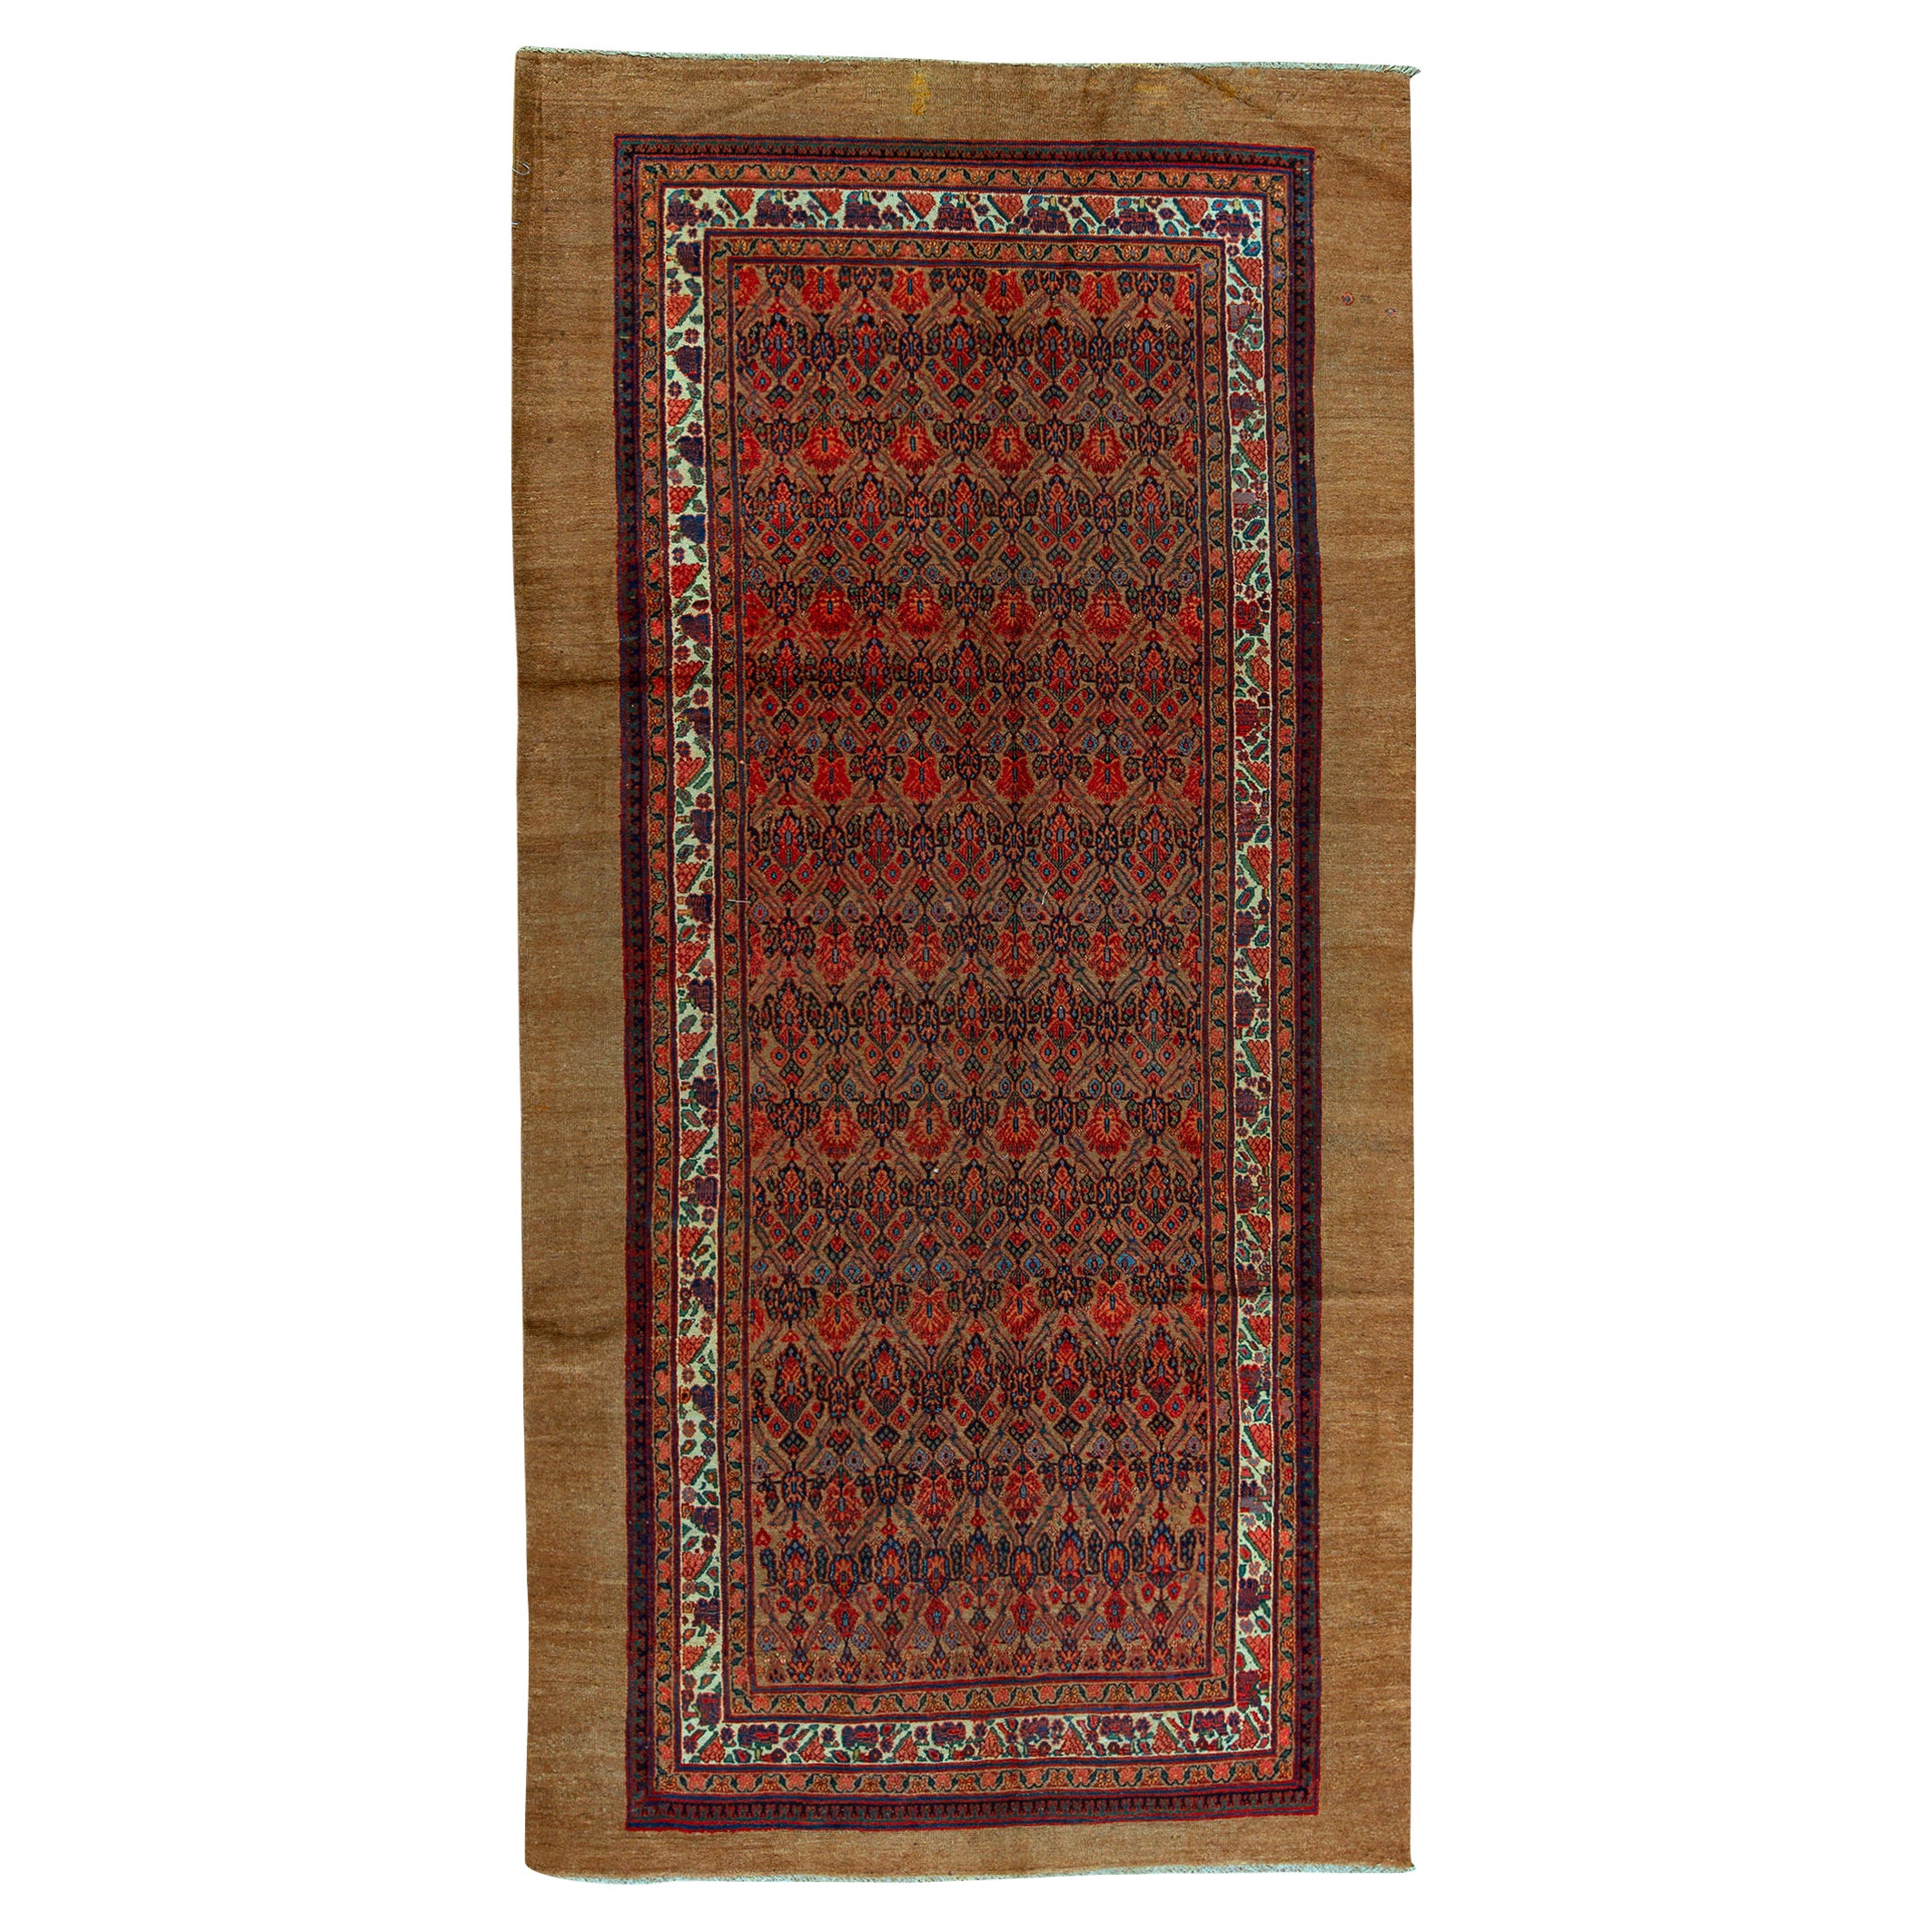   Antique Persian Fine Traditional Handwoven Luxury Wool Multi Rug